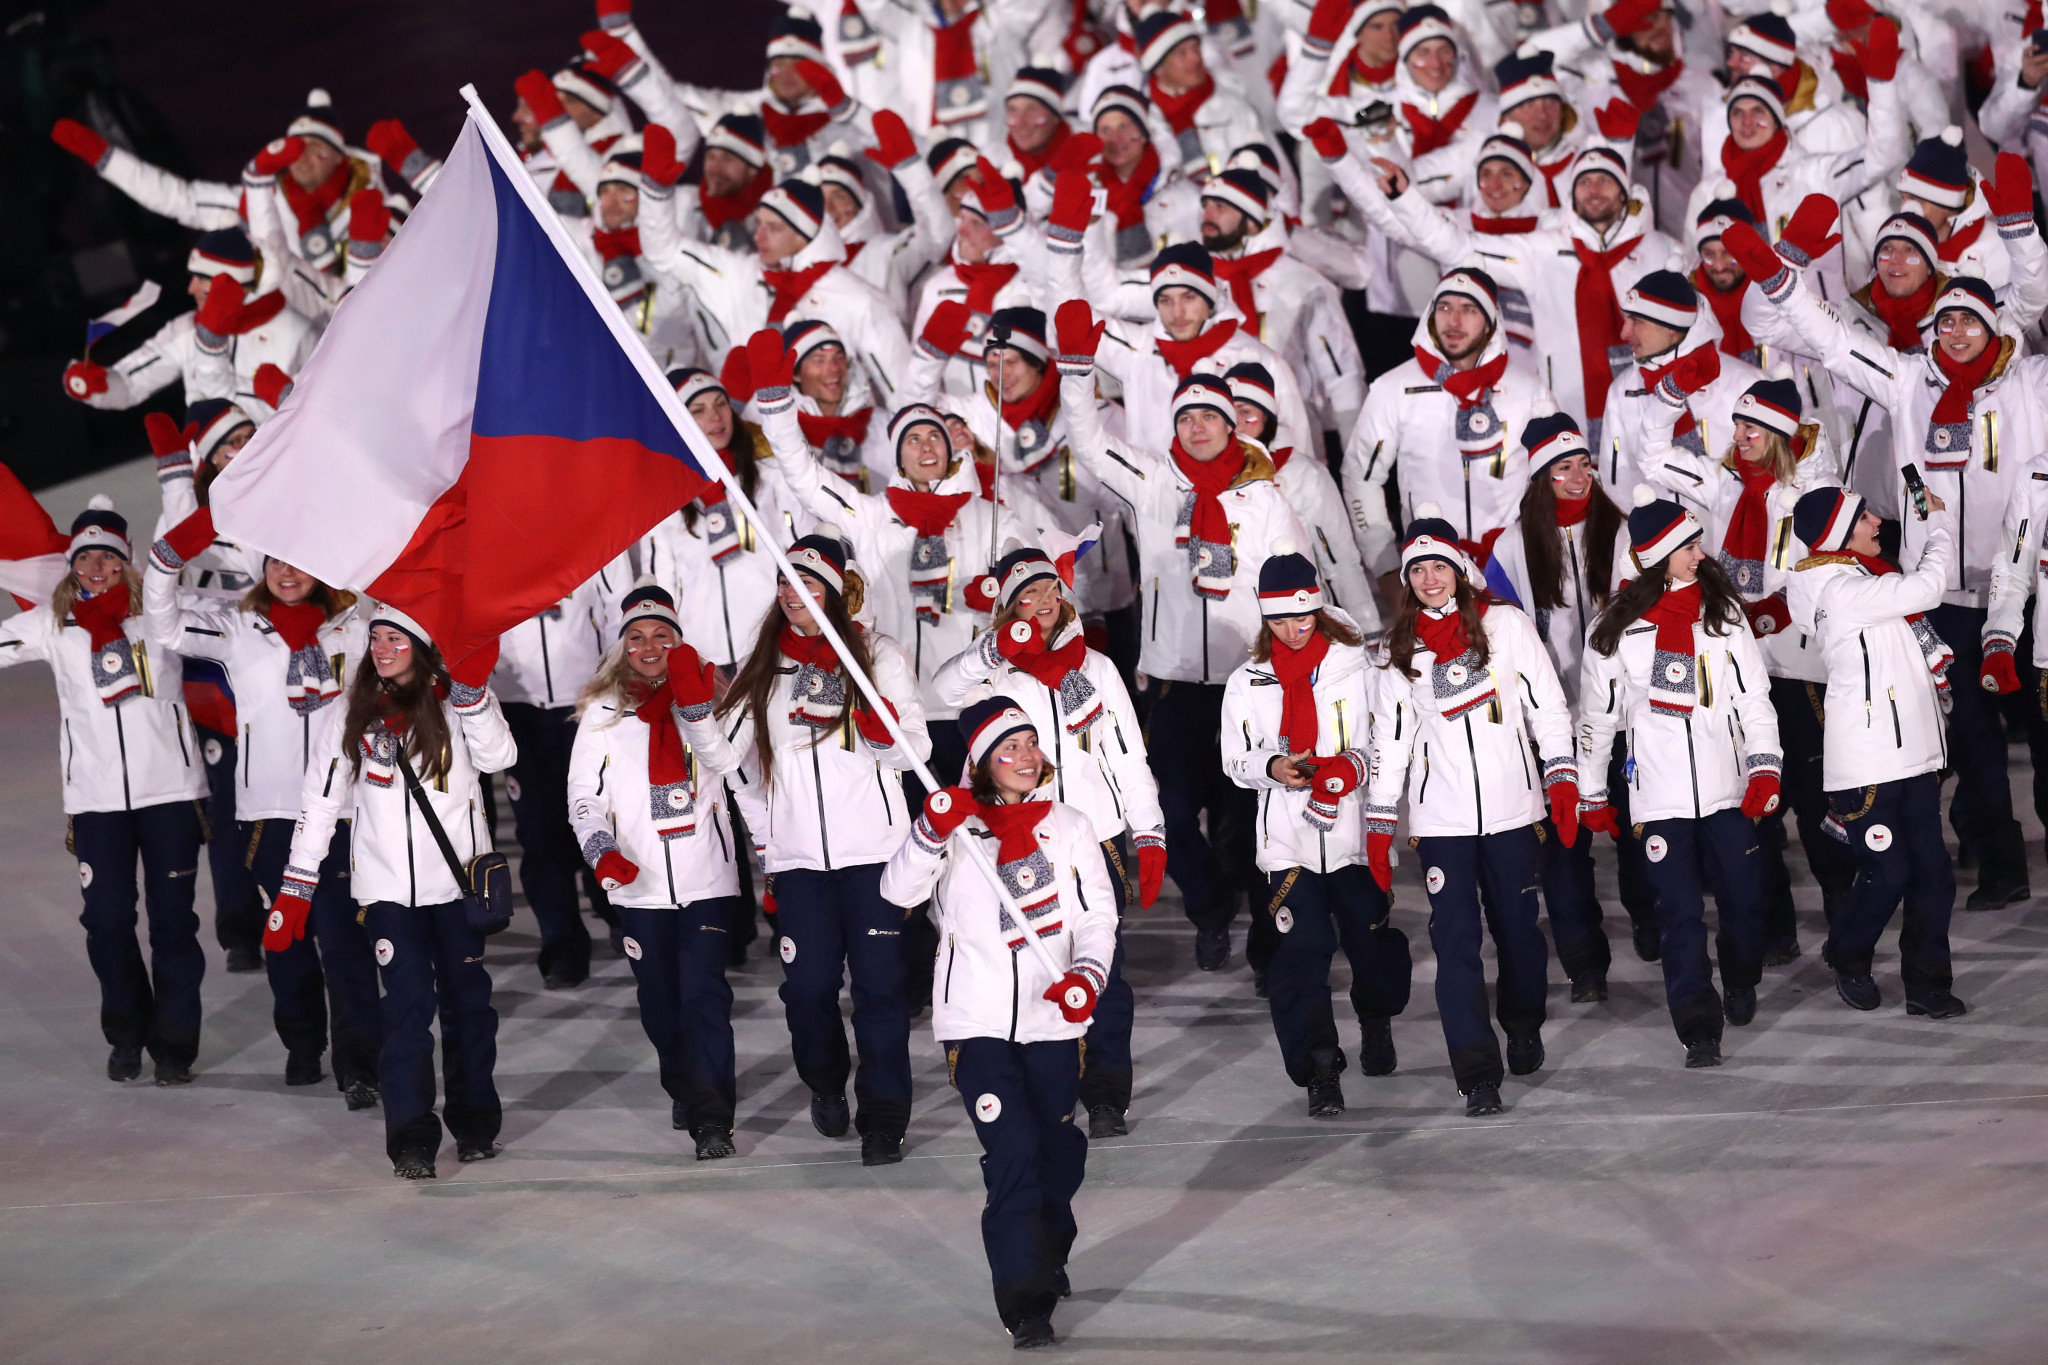 Czech Olympic Committee to request country's name changed by IOC to Czechia